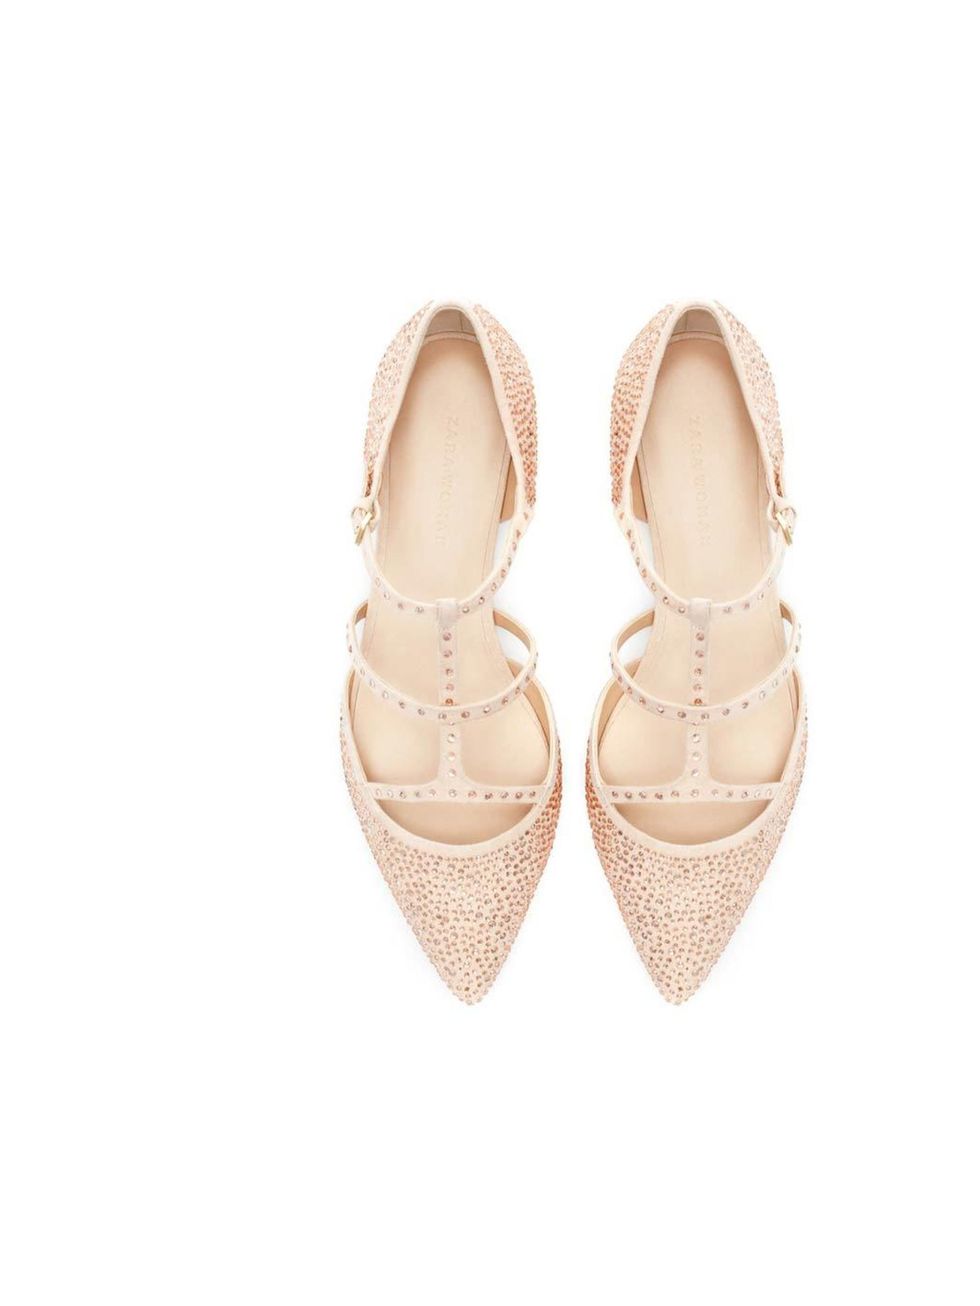 <p>Flat shoes needn't be boring - follow in Fashion Assistant Espe de la Fuente's footsteps with an embellished pump.</p><p><a href="http://www.zara.com/uk/en/woman/shoes/shiny-pointy-ballerina-c269191p1296407.html">Zara</a> shoes, £59.99</p>